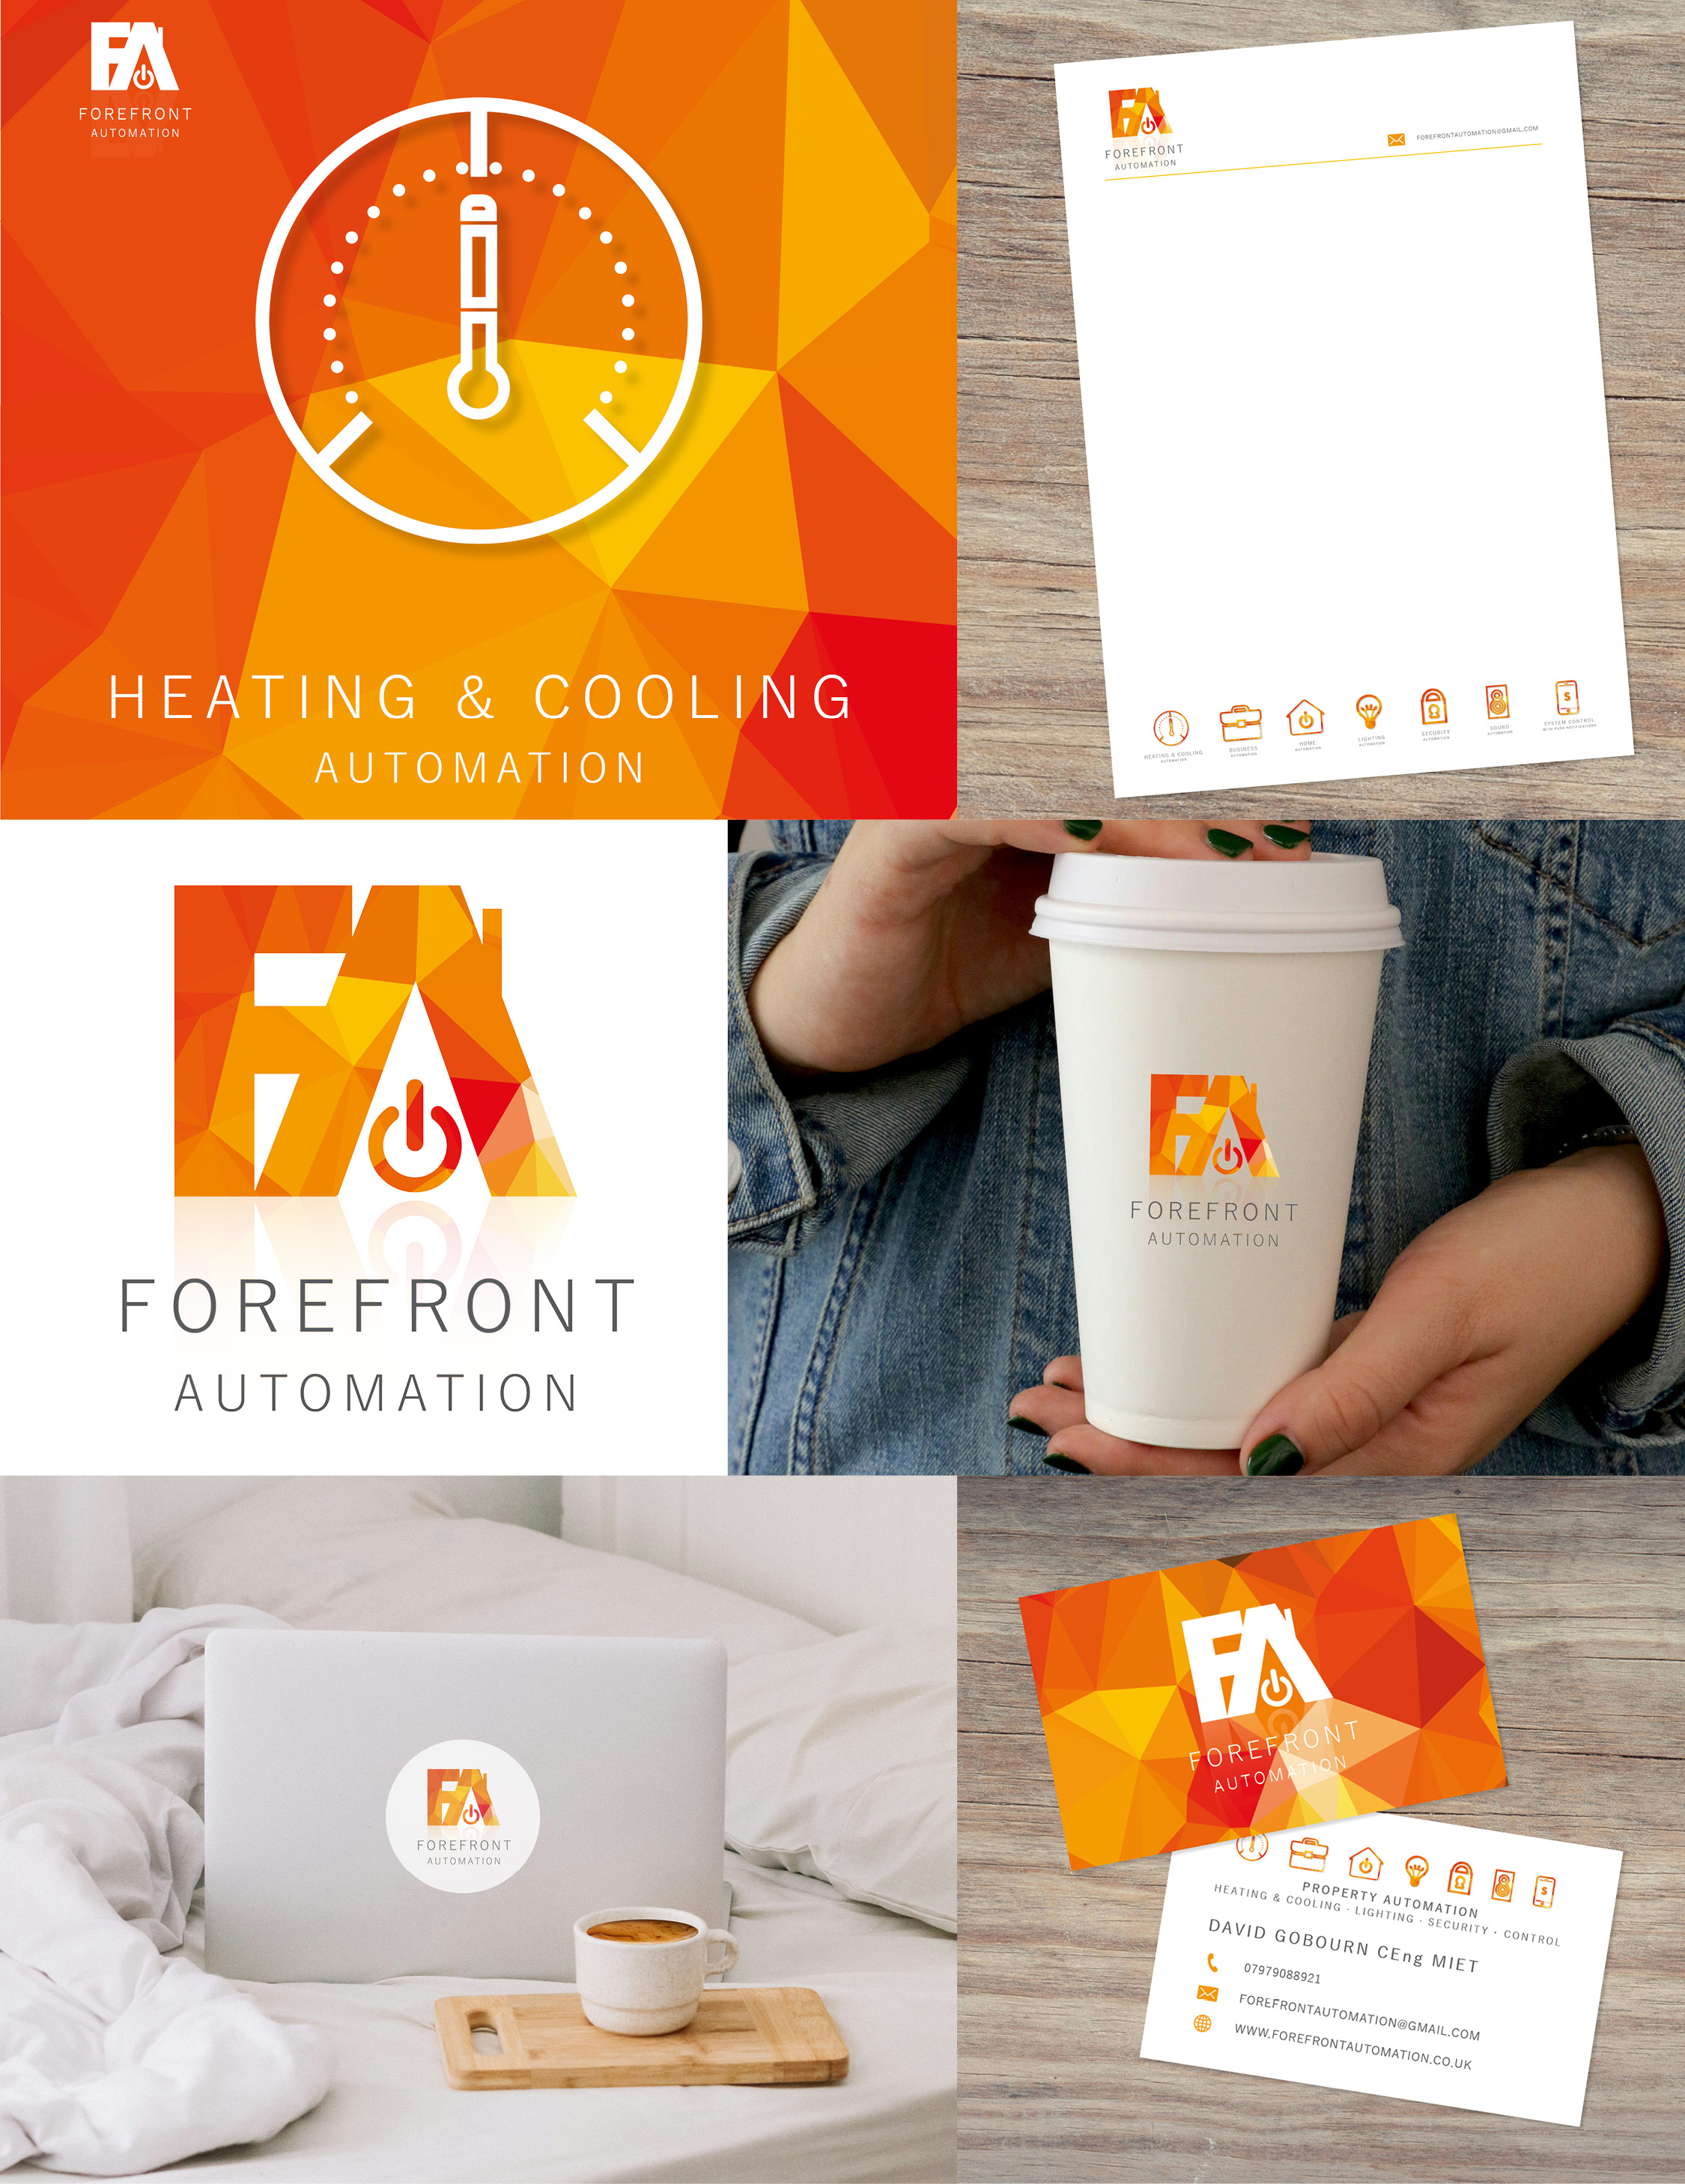 Brand designs created for Forefront Automation Ltd